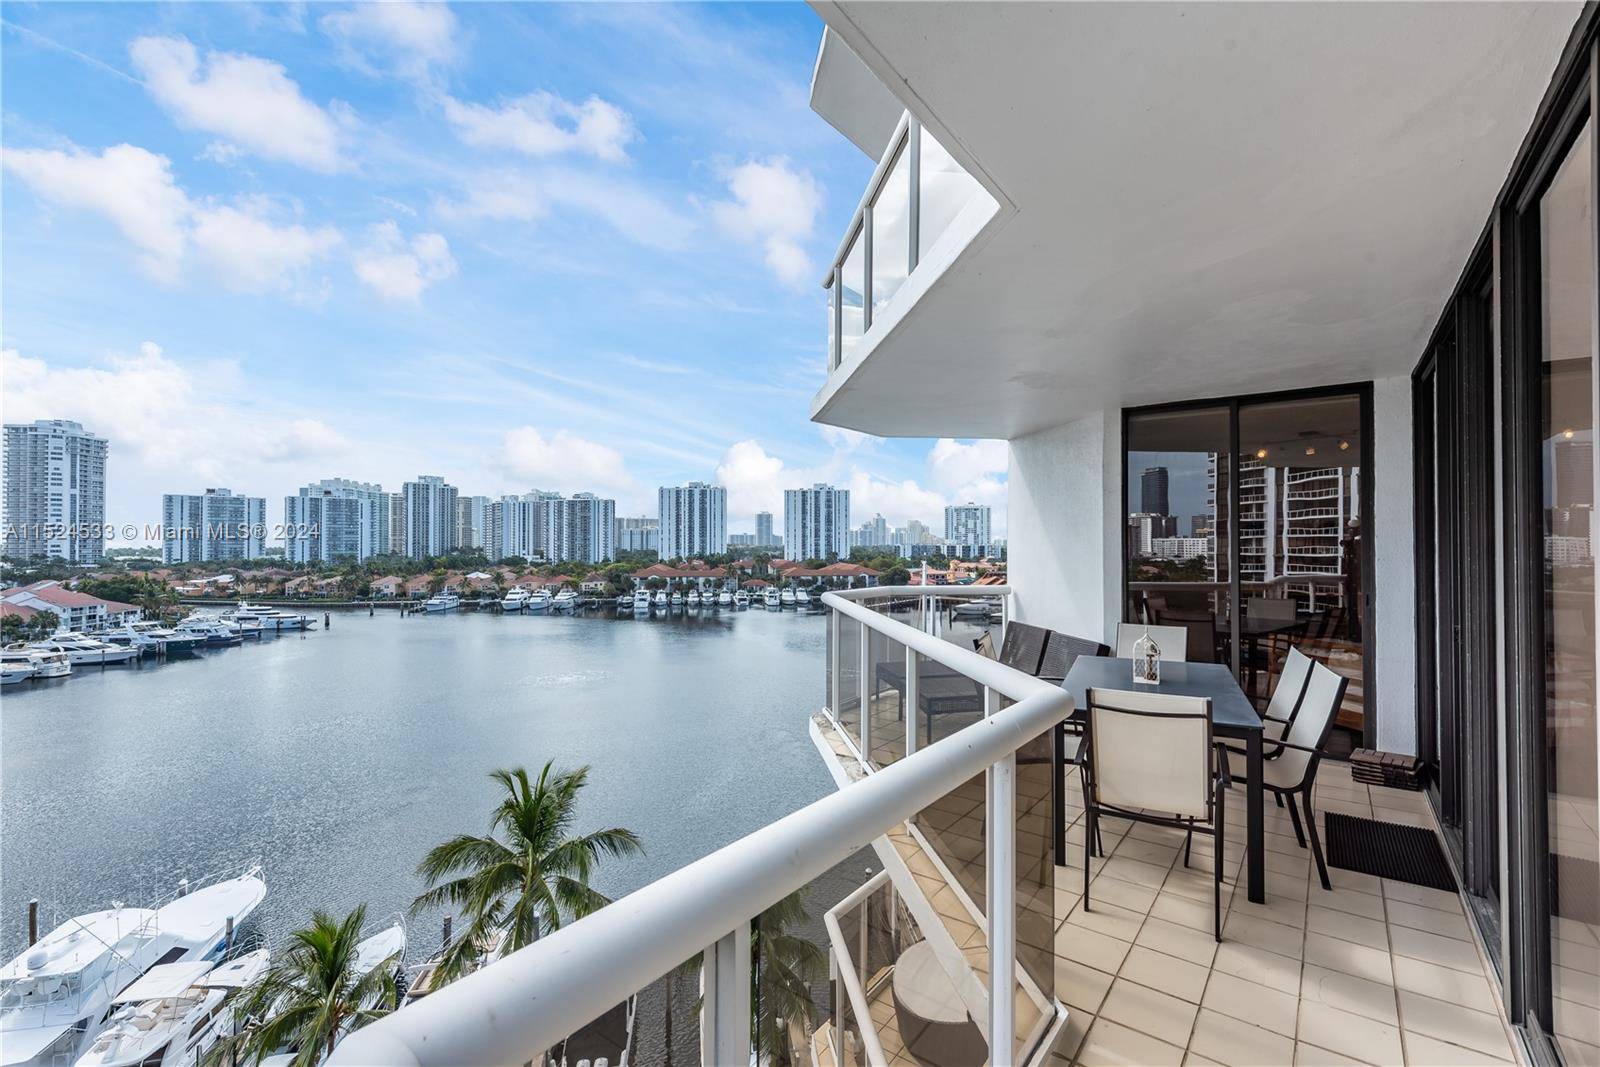 Best line in Portsview with incredible waterfront views.